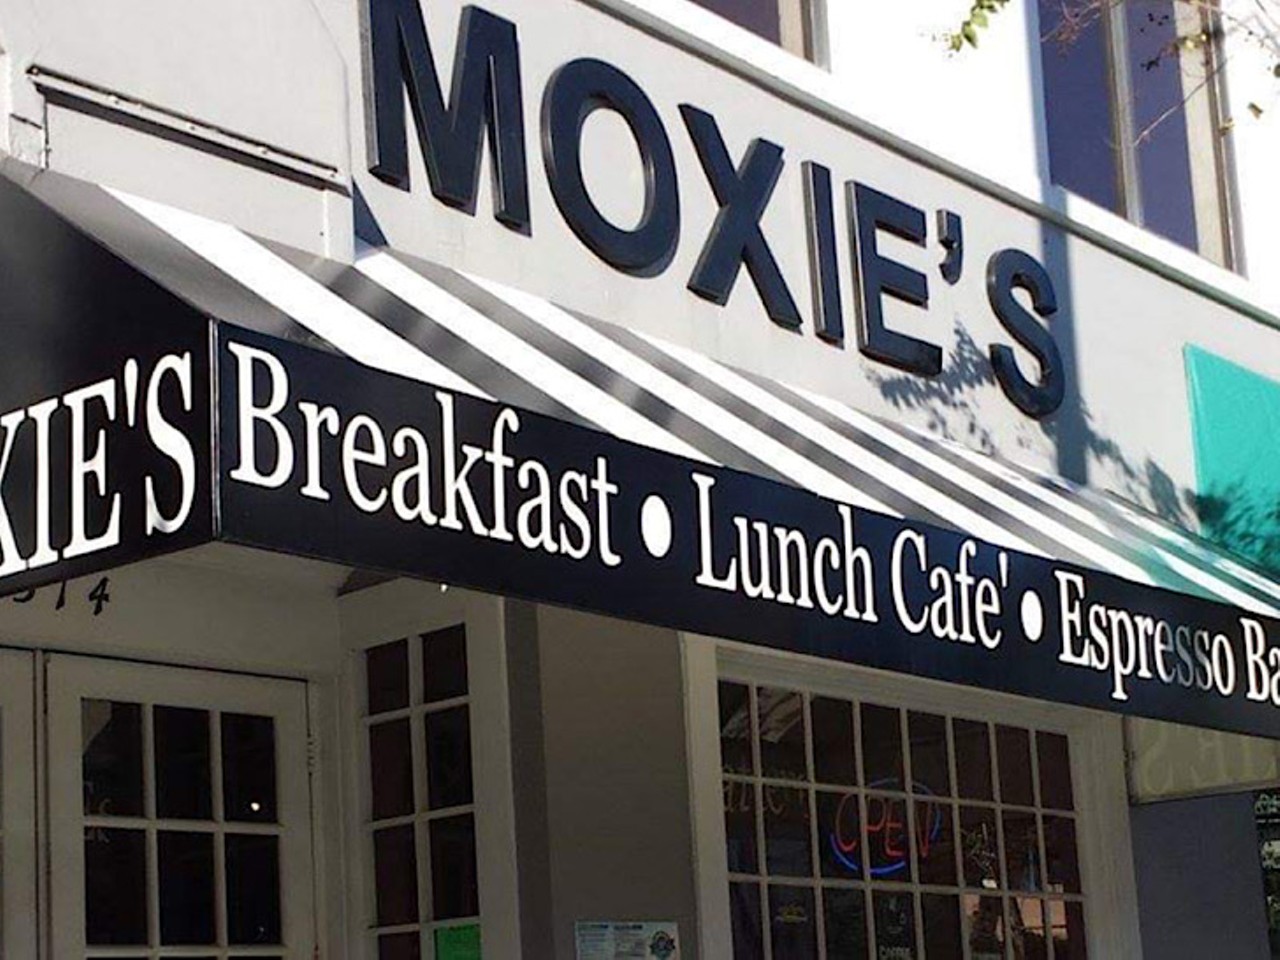 Moxie&#146;s  
Multiple locations
Not just another cafe and deli downtown, Moxie's has an espresso bar menu to rival Starbucks, as well as a large menu consisting of breakfast items, sandwiches, salads, and wraps with many options available on crusty Cuban bread.
Photo via Moxie&#146;s/Facebook